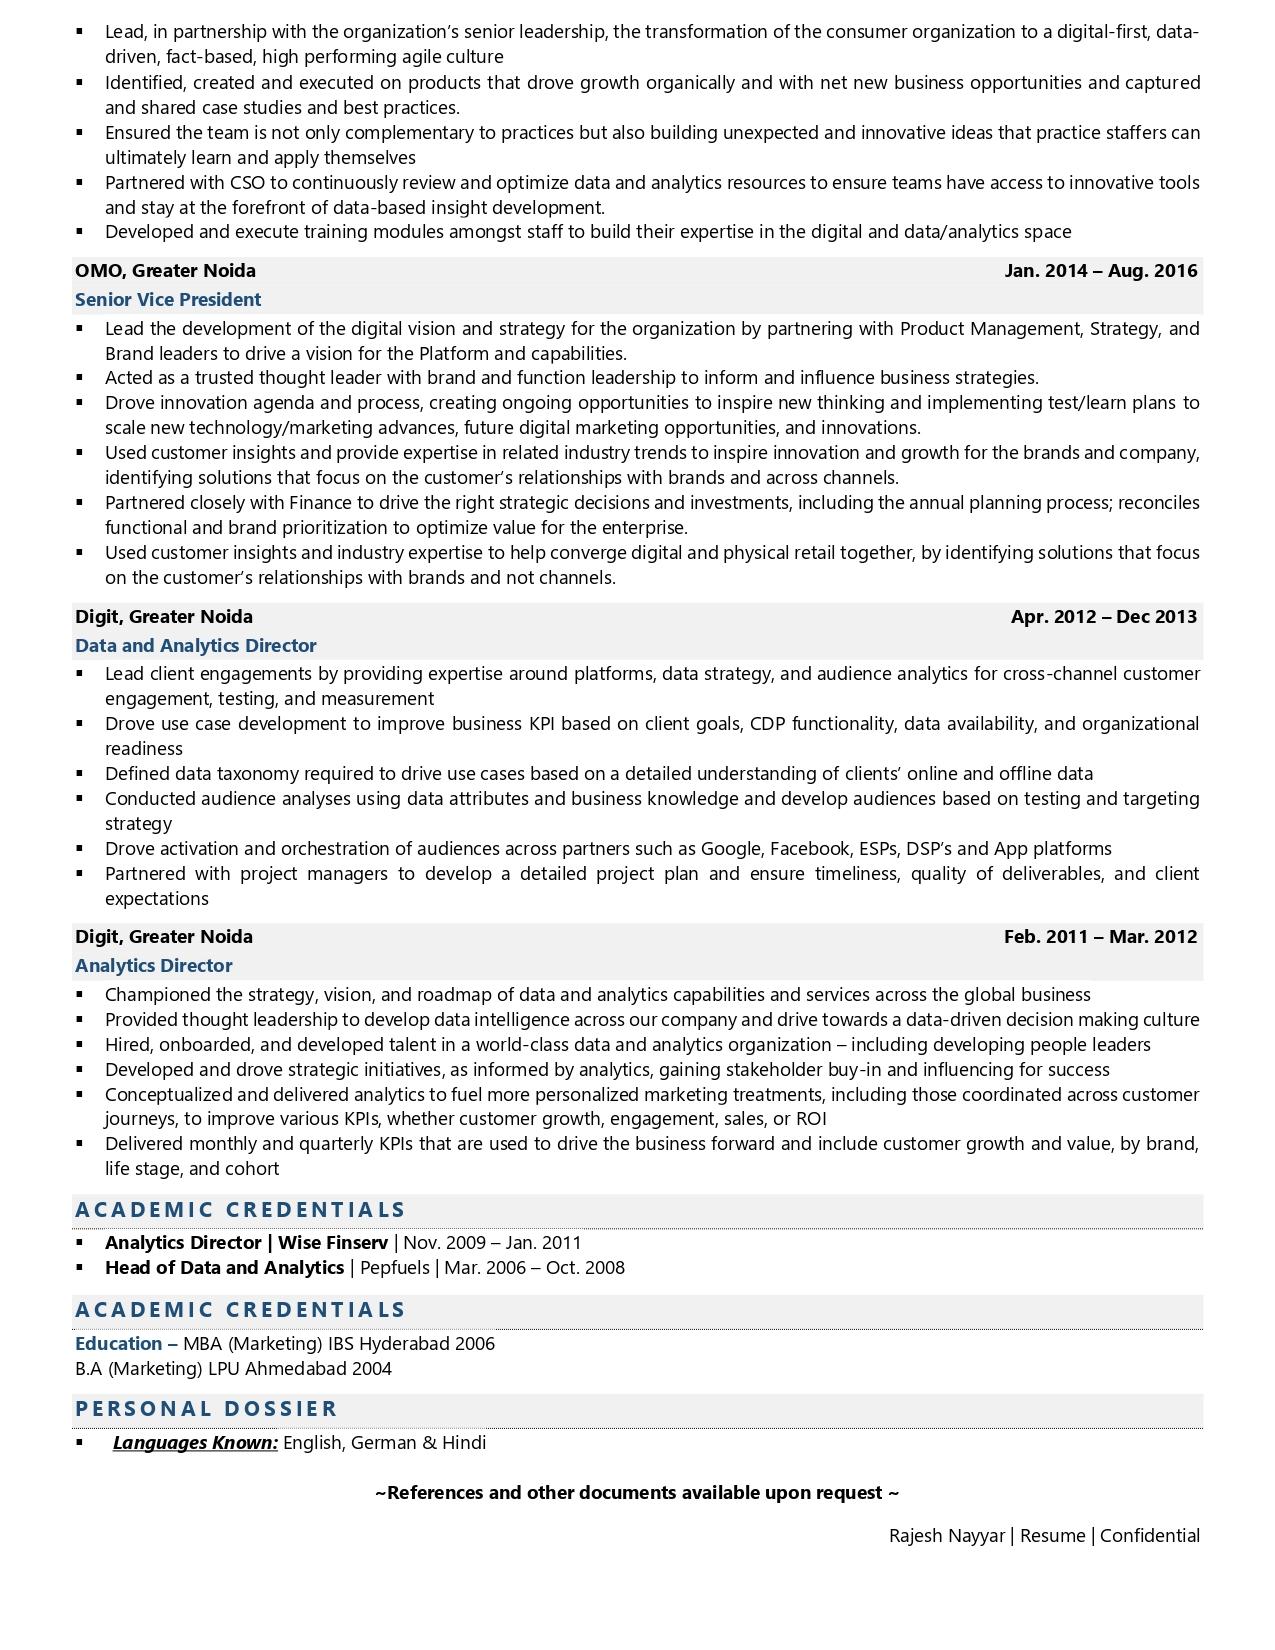 Chief Digital Officer - Resume Example & Template